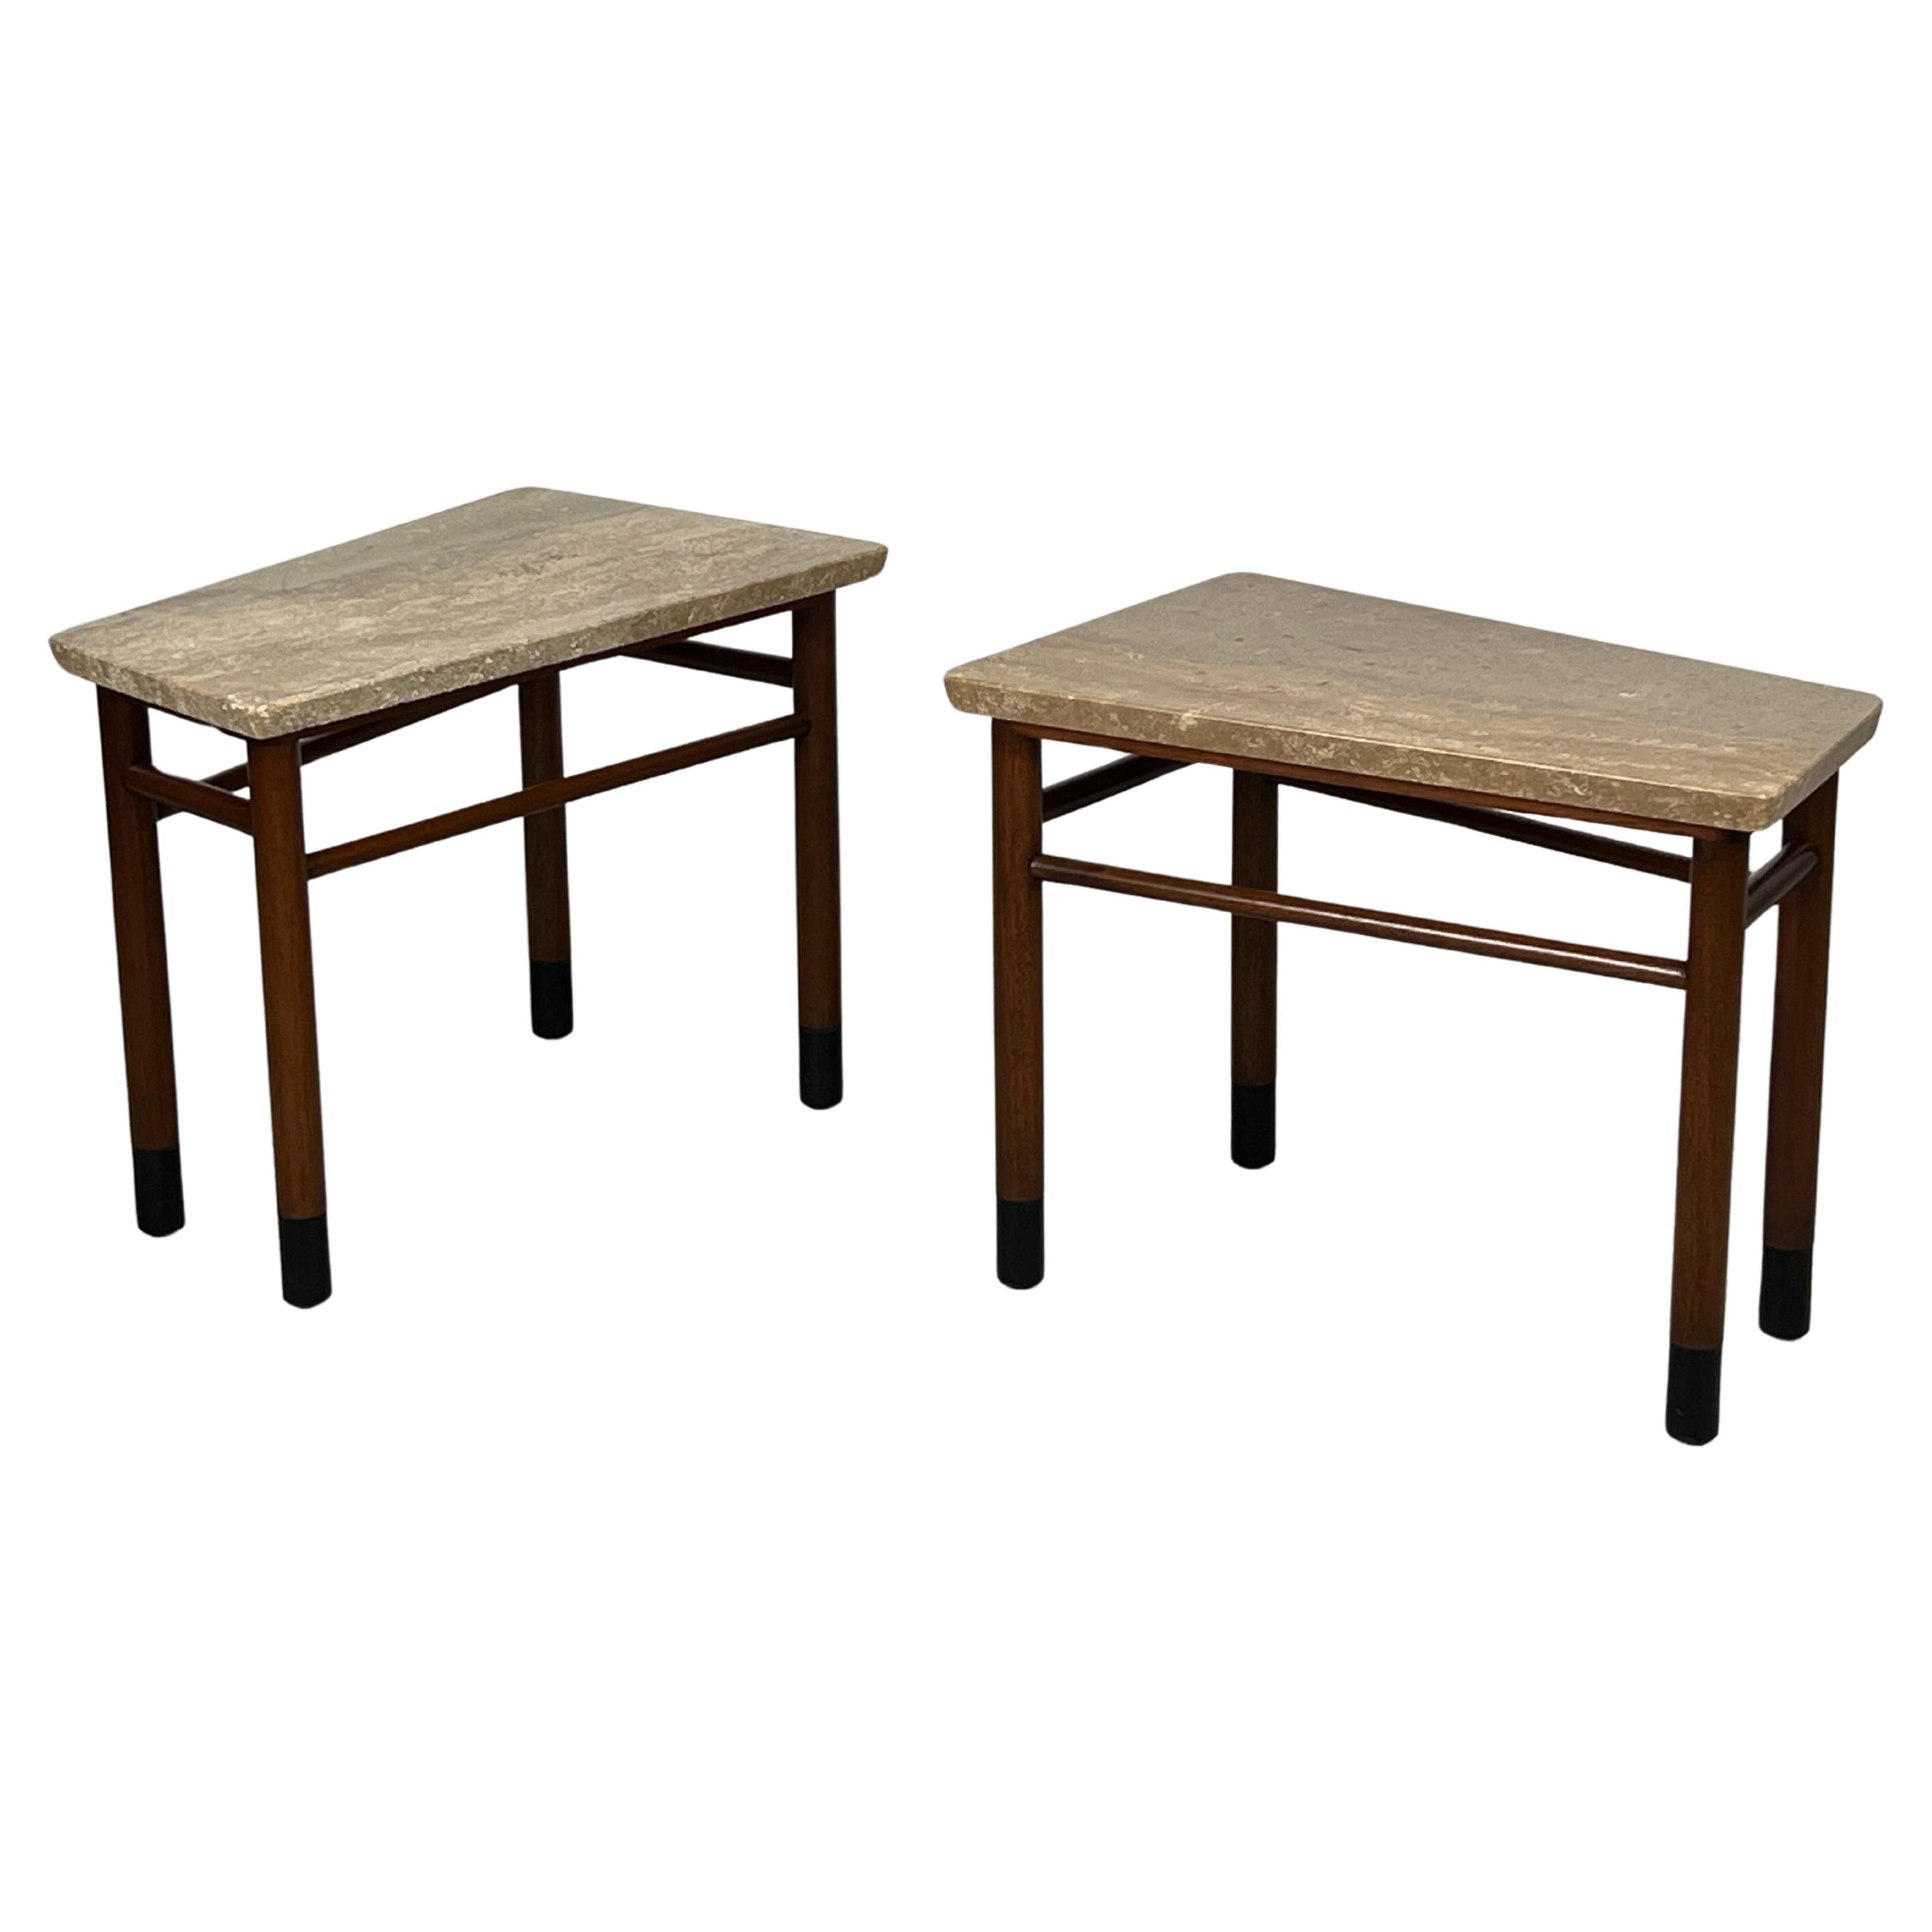 Pair of Wedge Shaped Travertine Tables by Edward Wormley for Dunbar For Sale